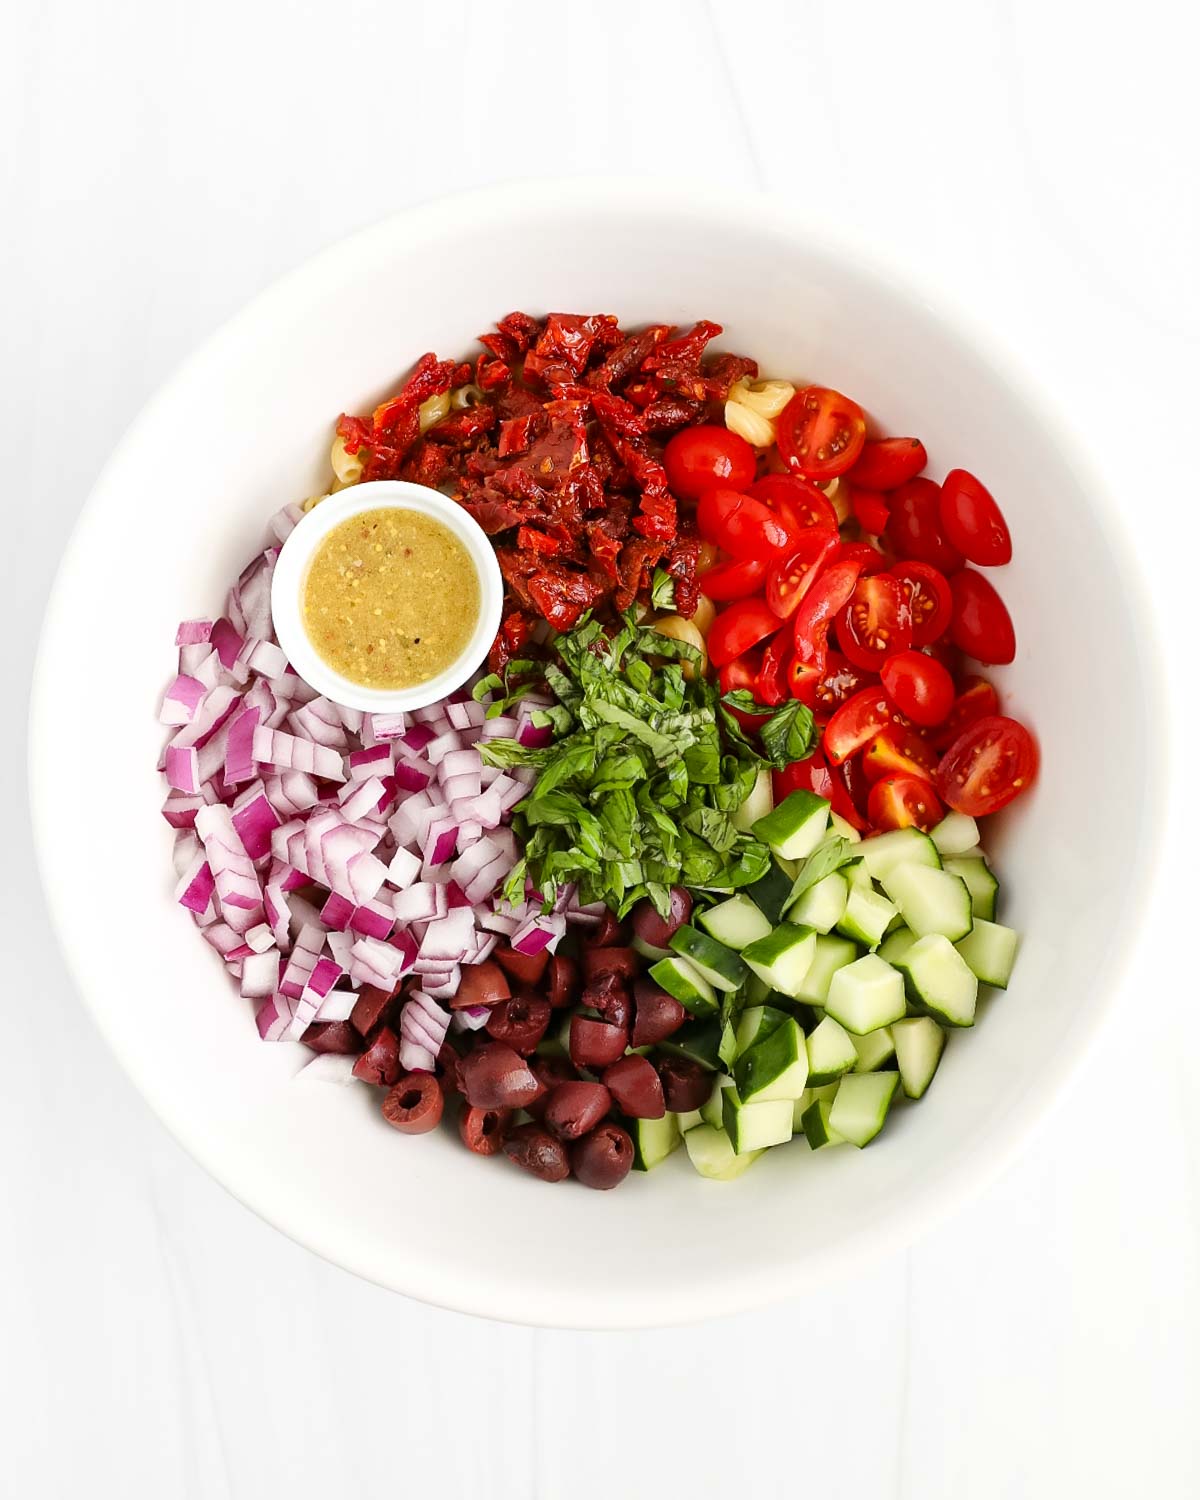 A bowl with sections of ingredients including tomatoes, sun dried tomatoes, cucumbers, olives, red onion, basil, and a small white bowl of homemade salad dressing.